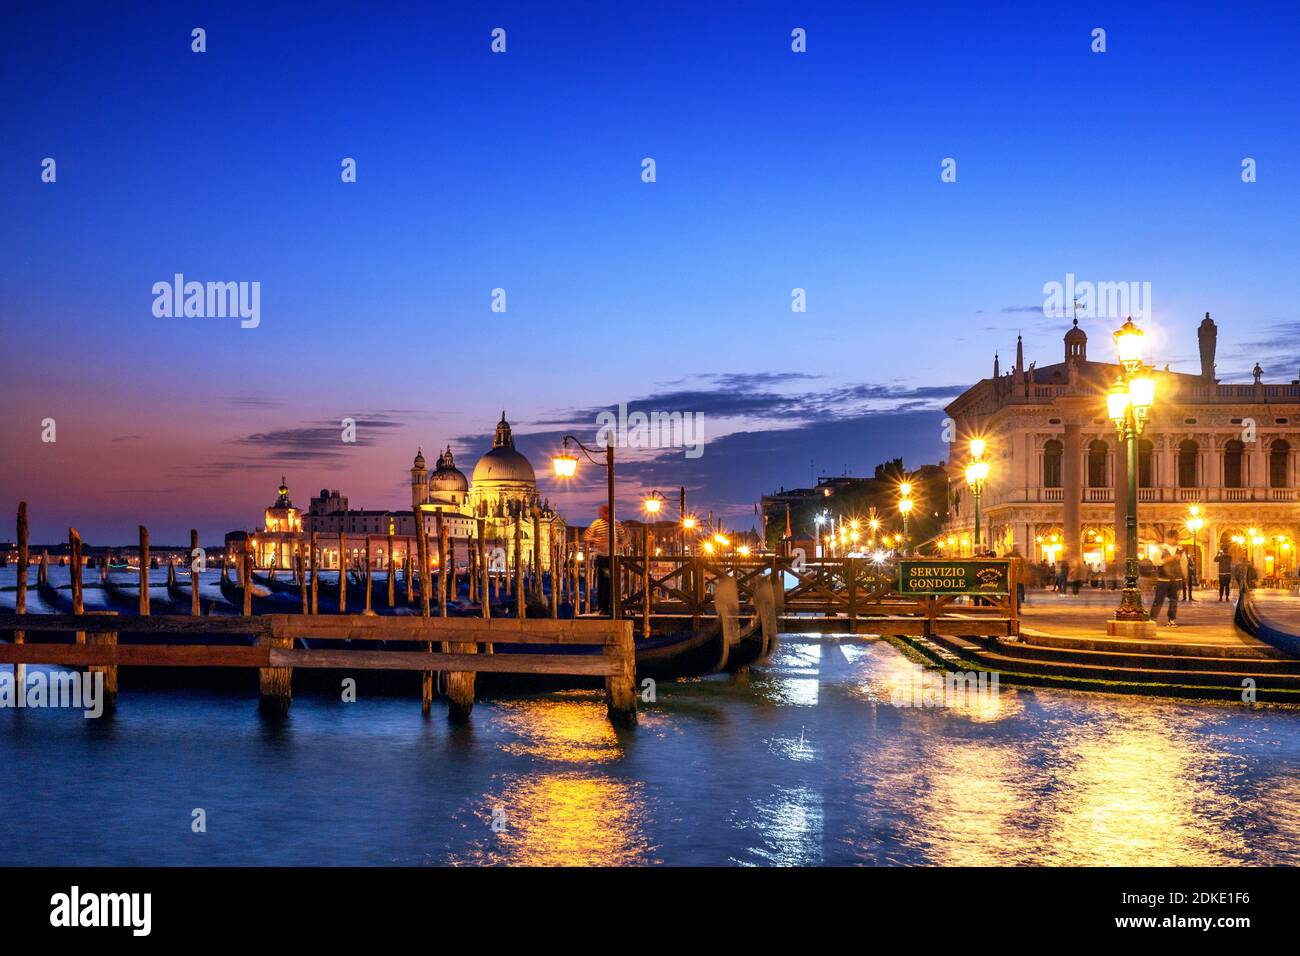 Venice with St. Mark's Square and the pier at the blue hour Stock Photo